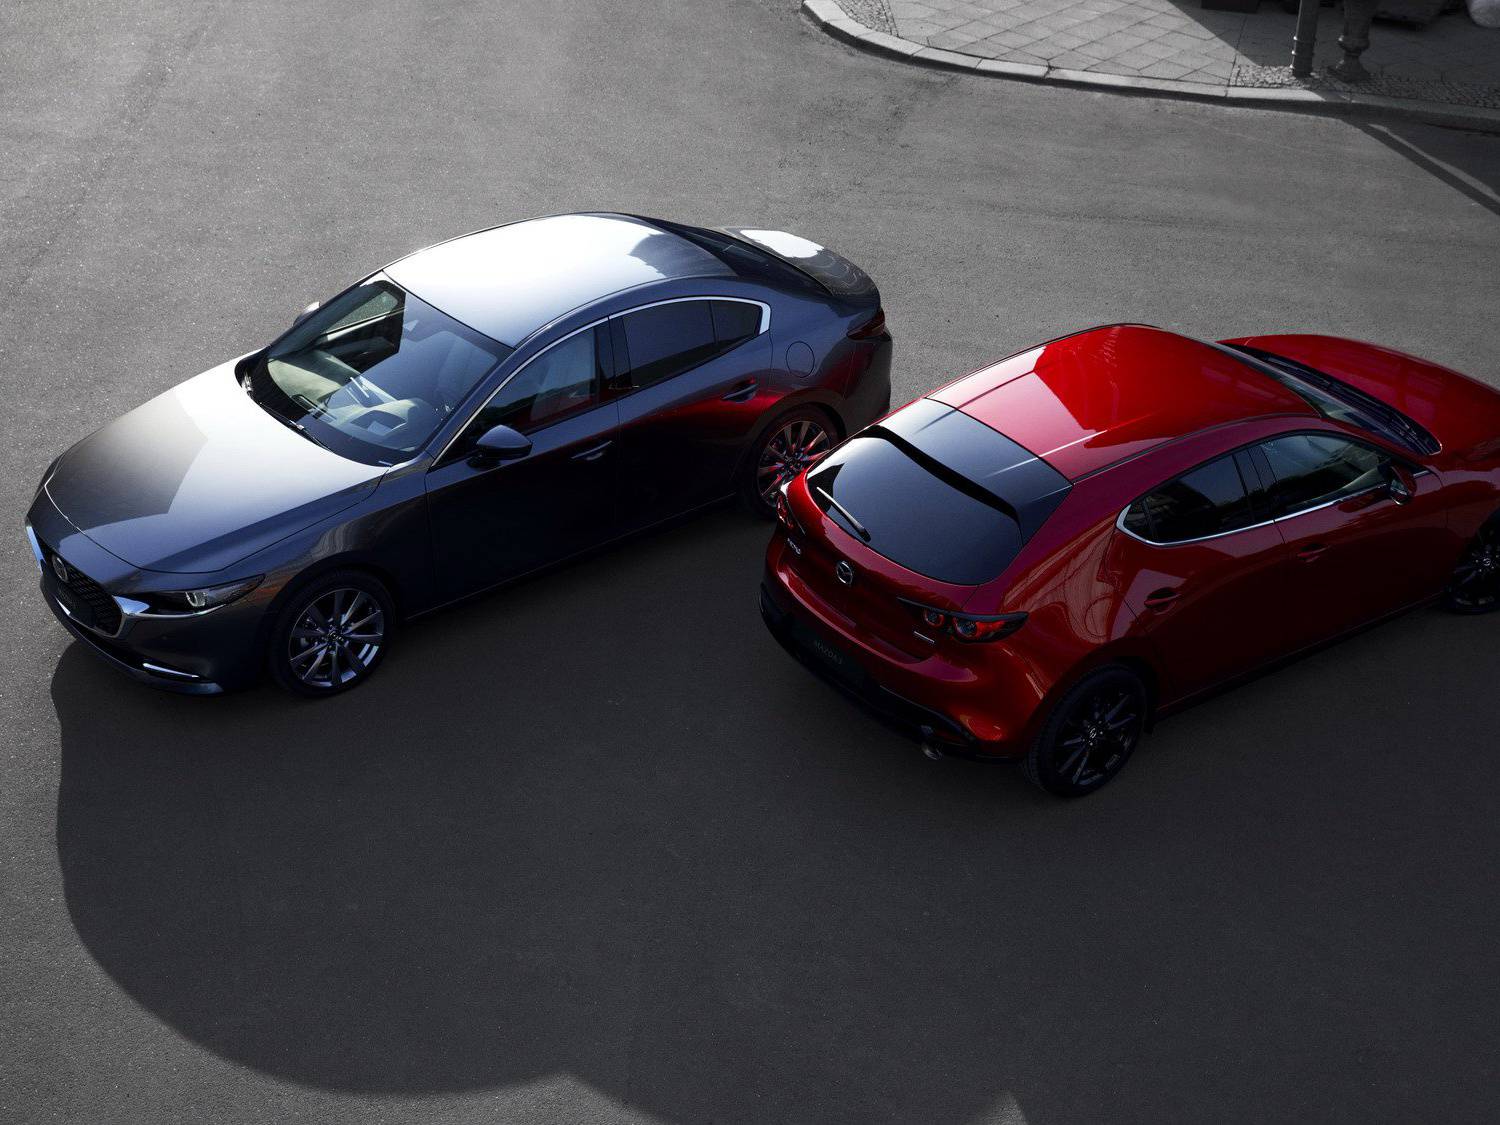 Total Car - Magazine - The new Mazda 3 has become stylish